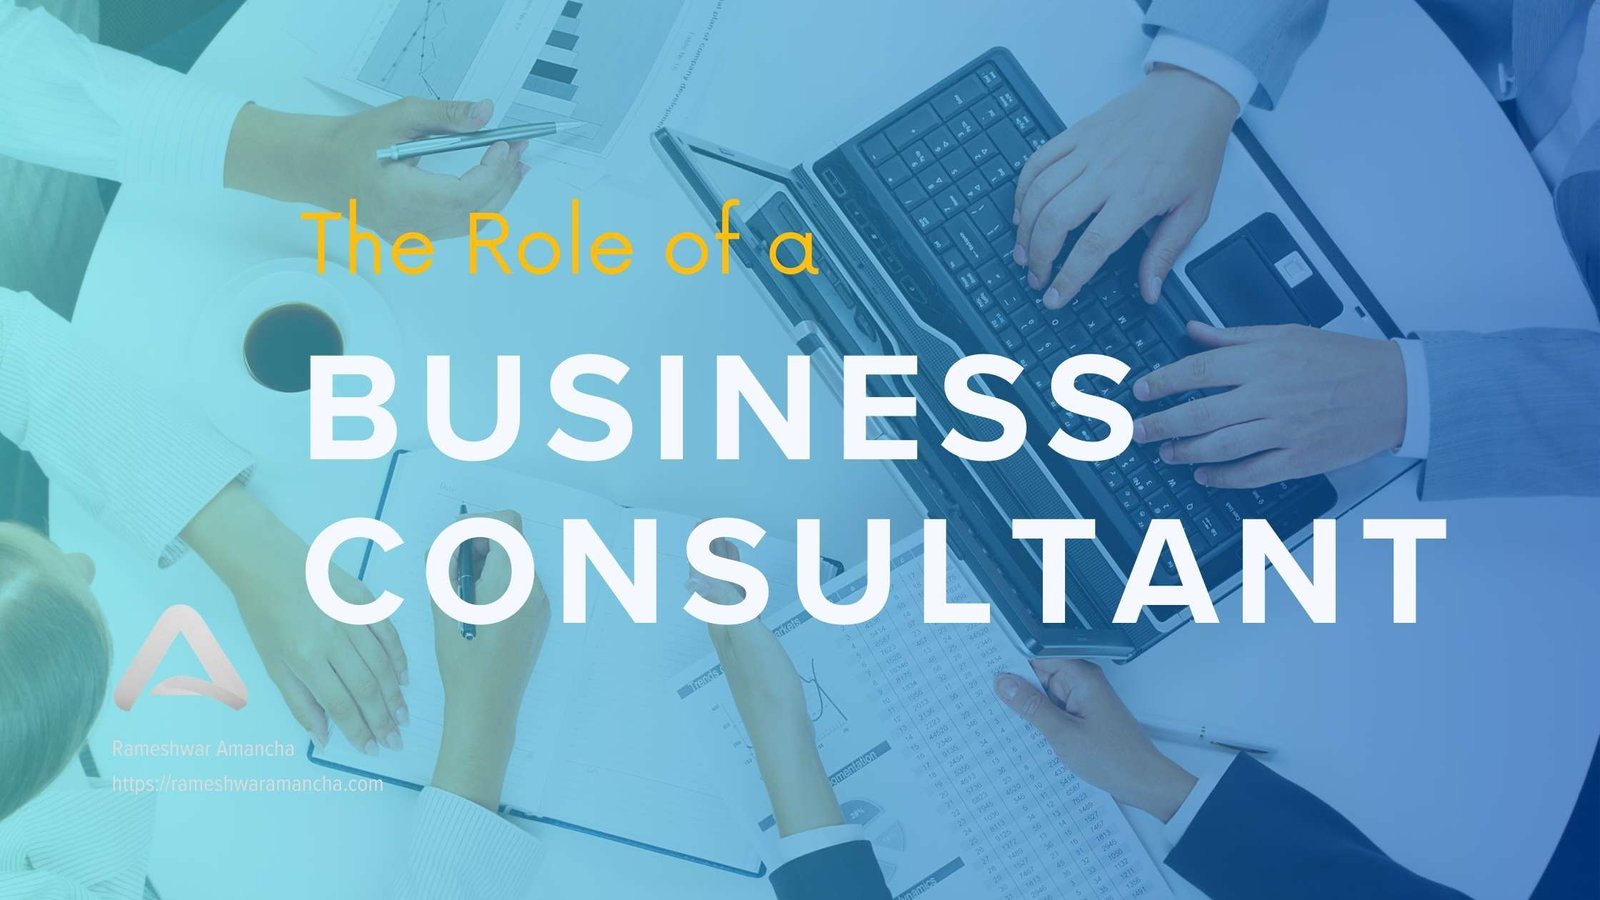 The Role of a Business Consultant